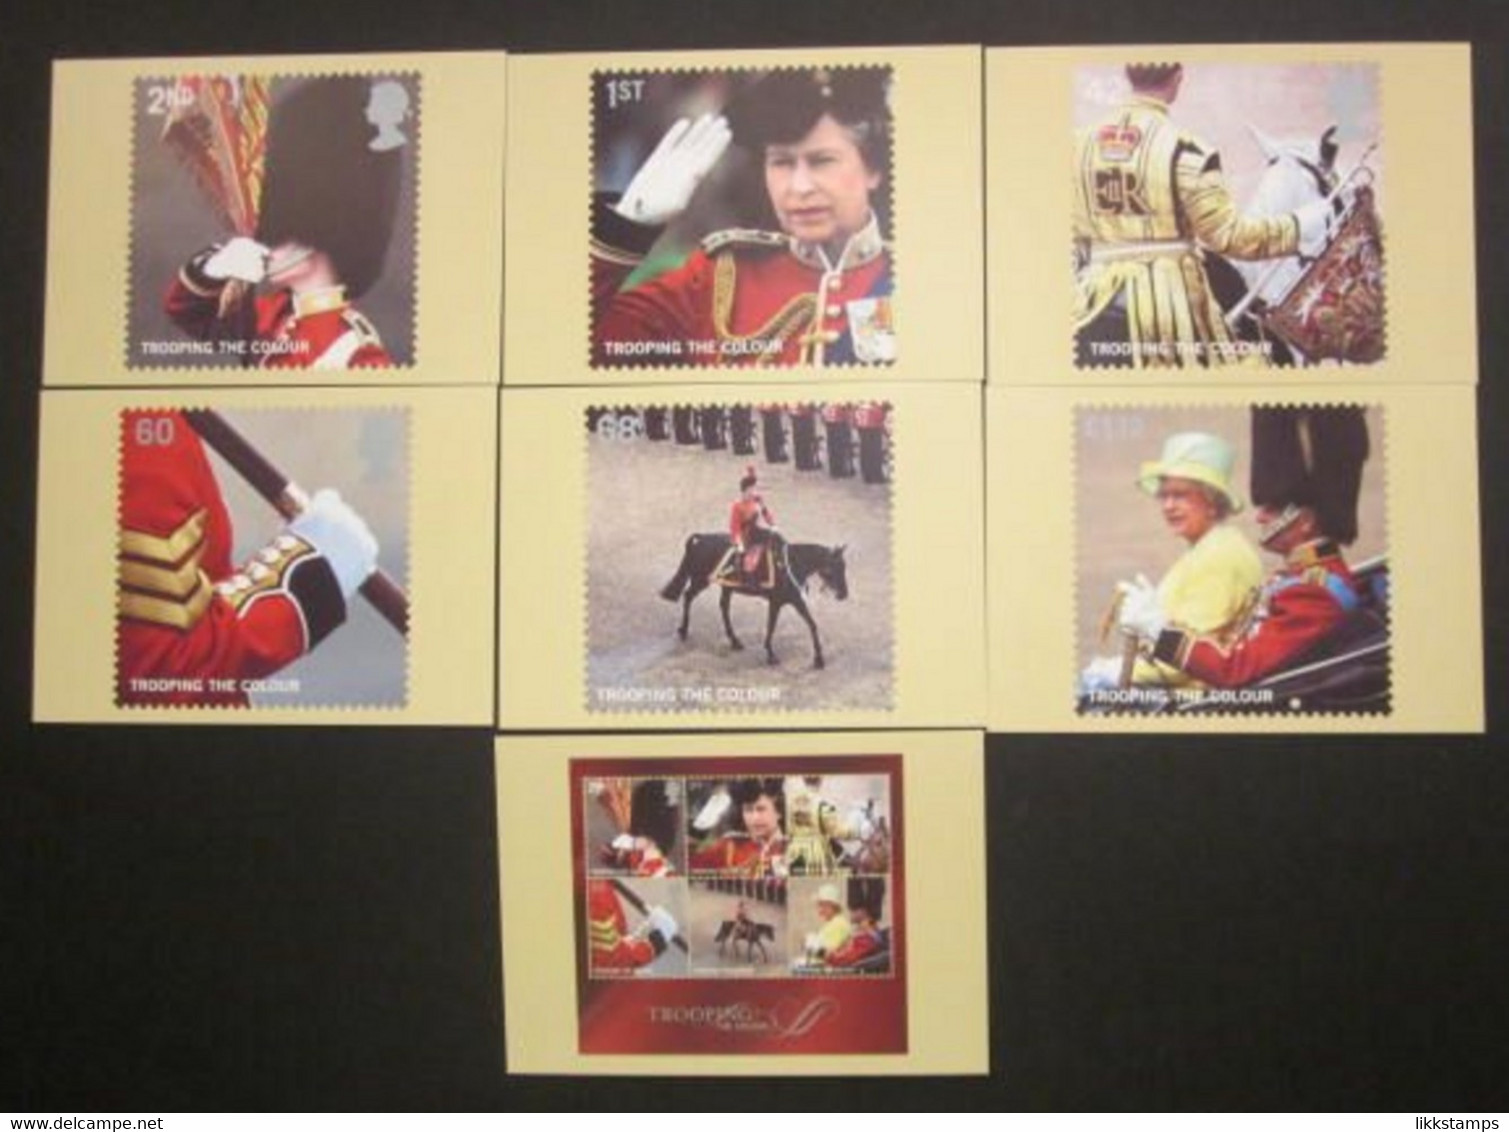 2005 TROOPING THE COLOUR P.H.Q. CARDS UNUSED, ISSUE No. 276 (B) #00839 - Tarjetas PHQ